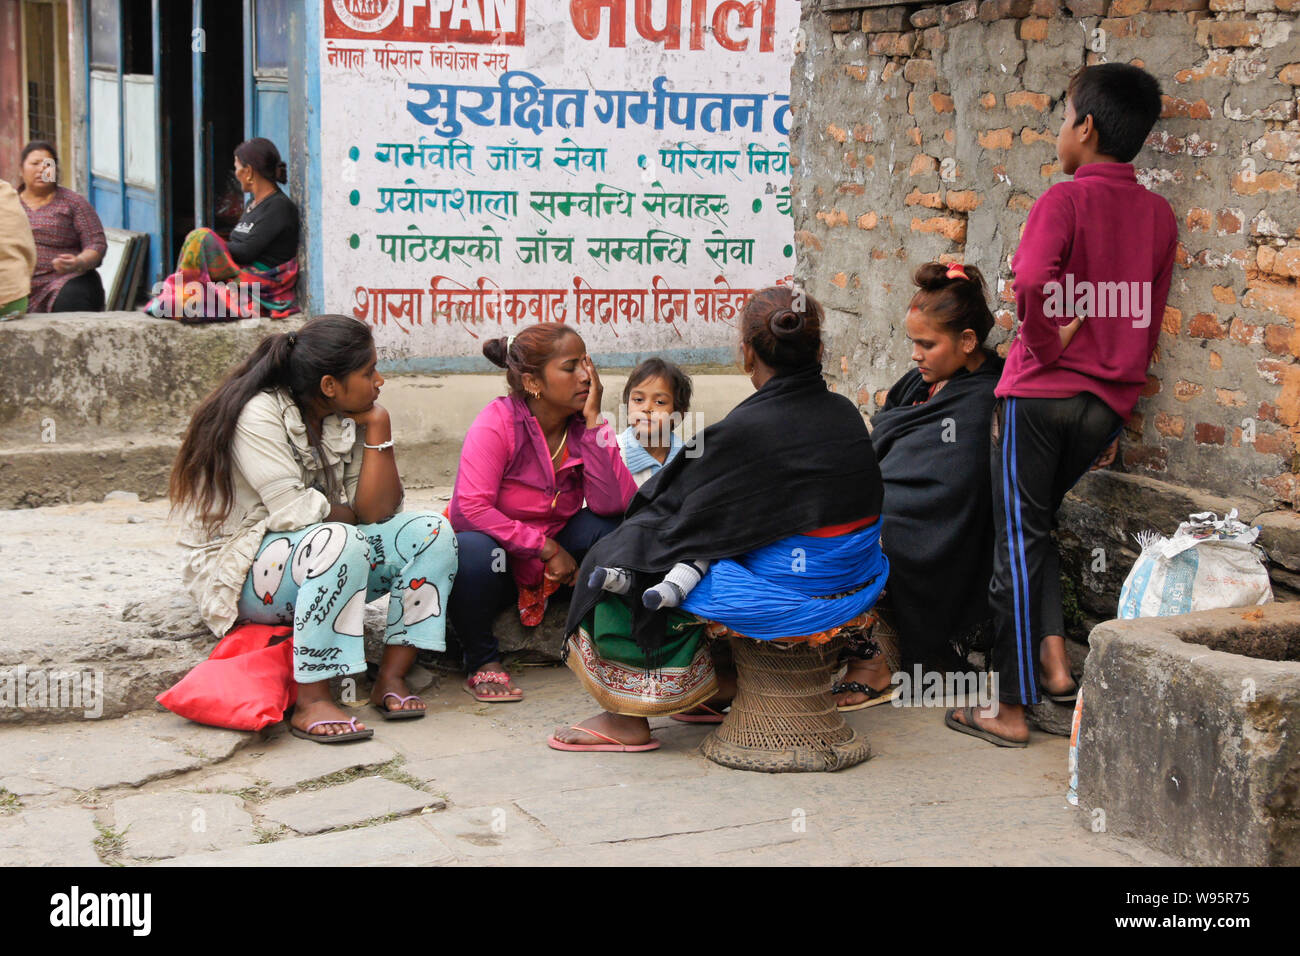 People socialize outside a shop in the Old Bazaar area of Pokhara, Nepal Stock Photo